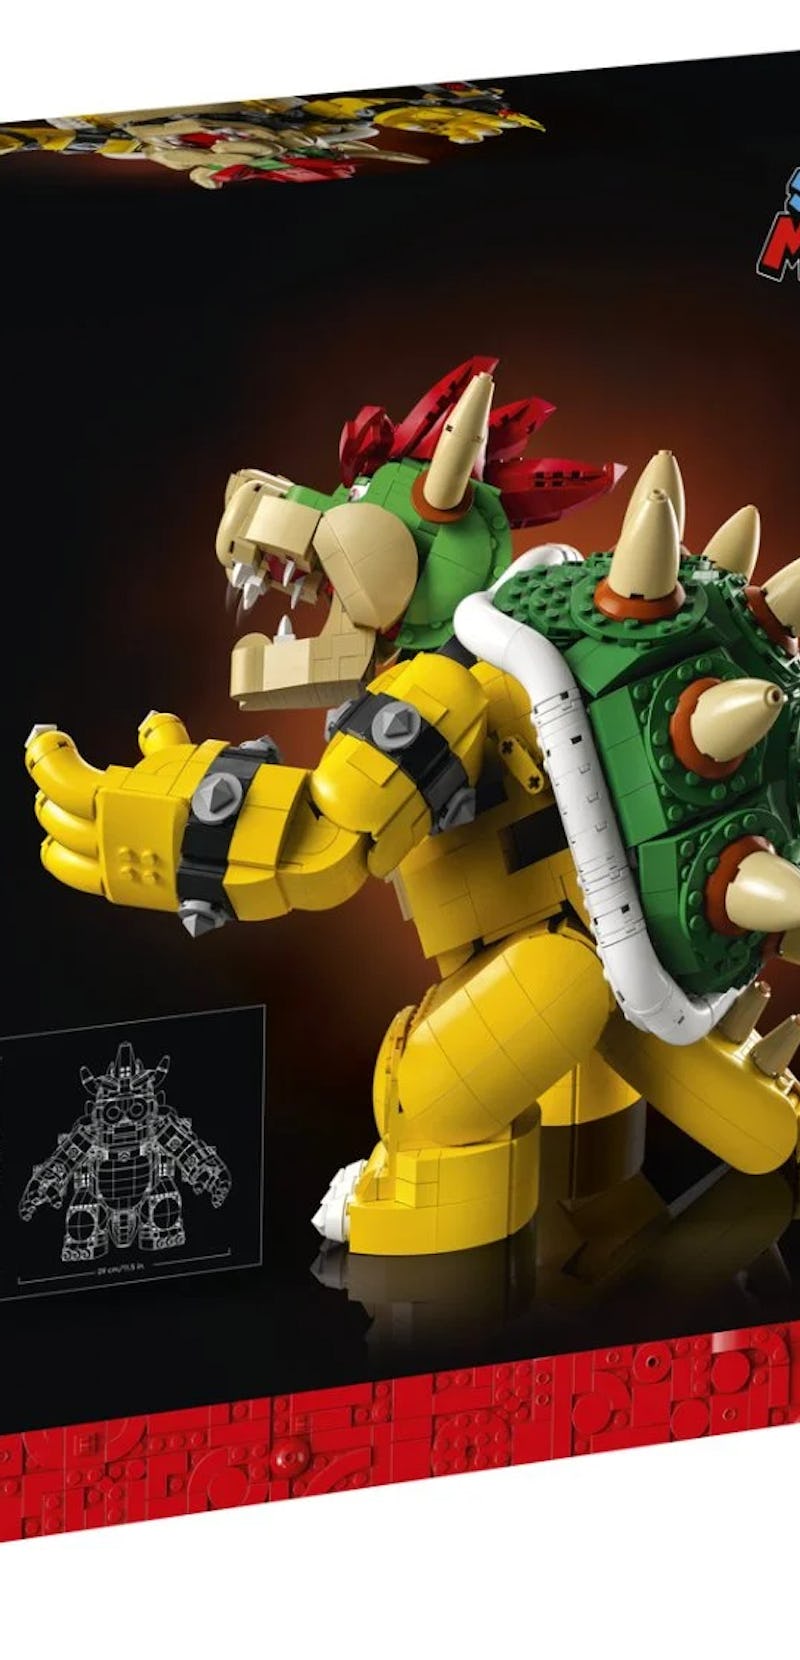 The packaging of the Mighty Bowser LEGO set